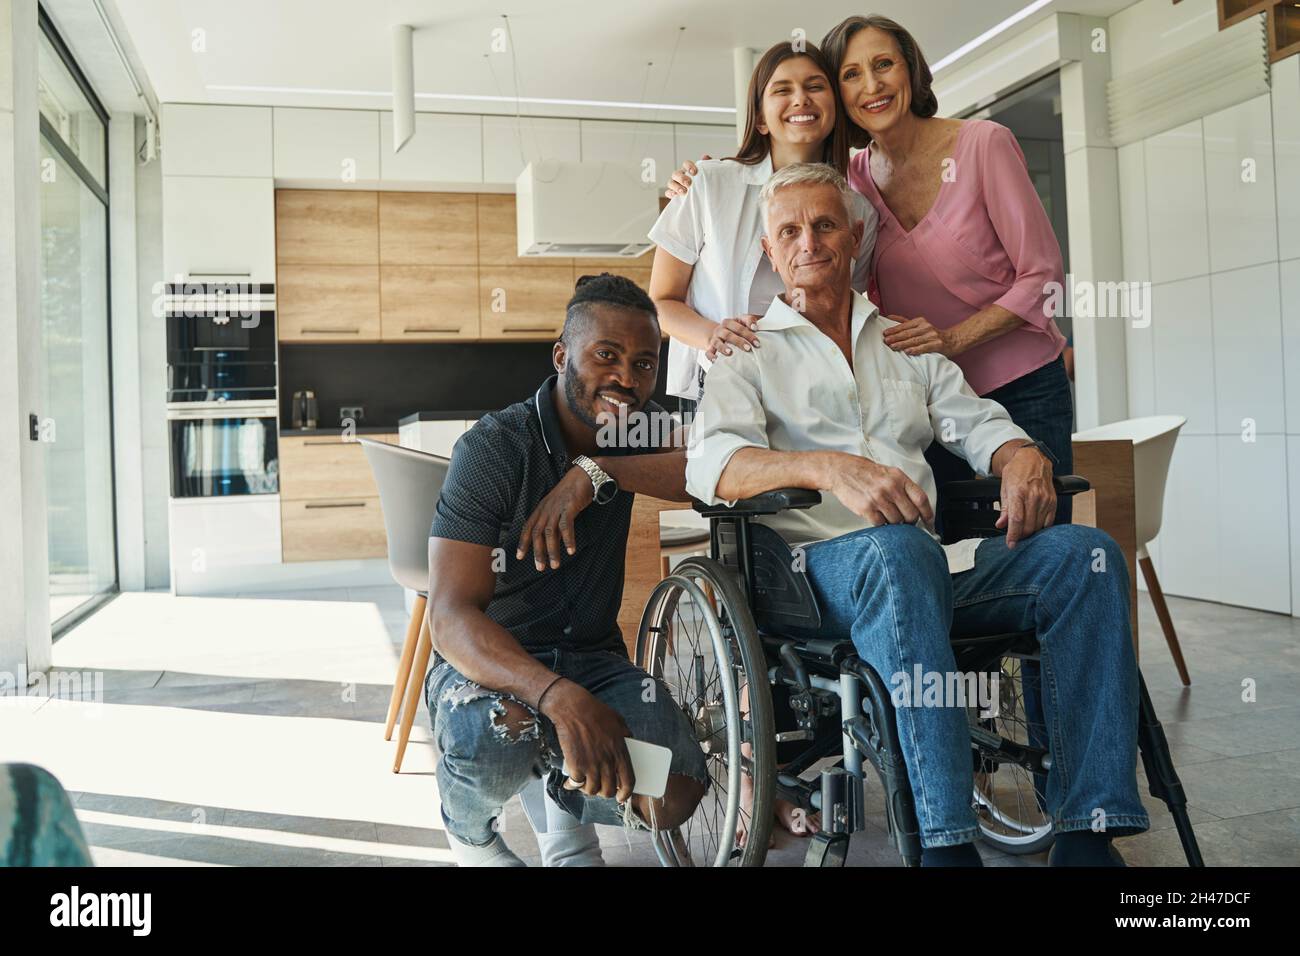 Relatives are maintaining man with physical disability Stock Photo